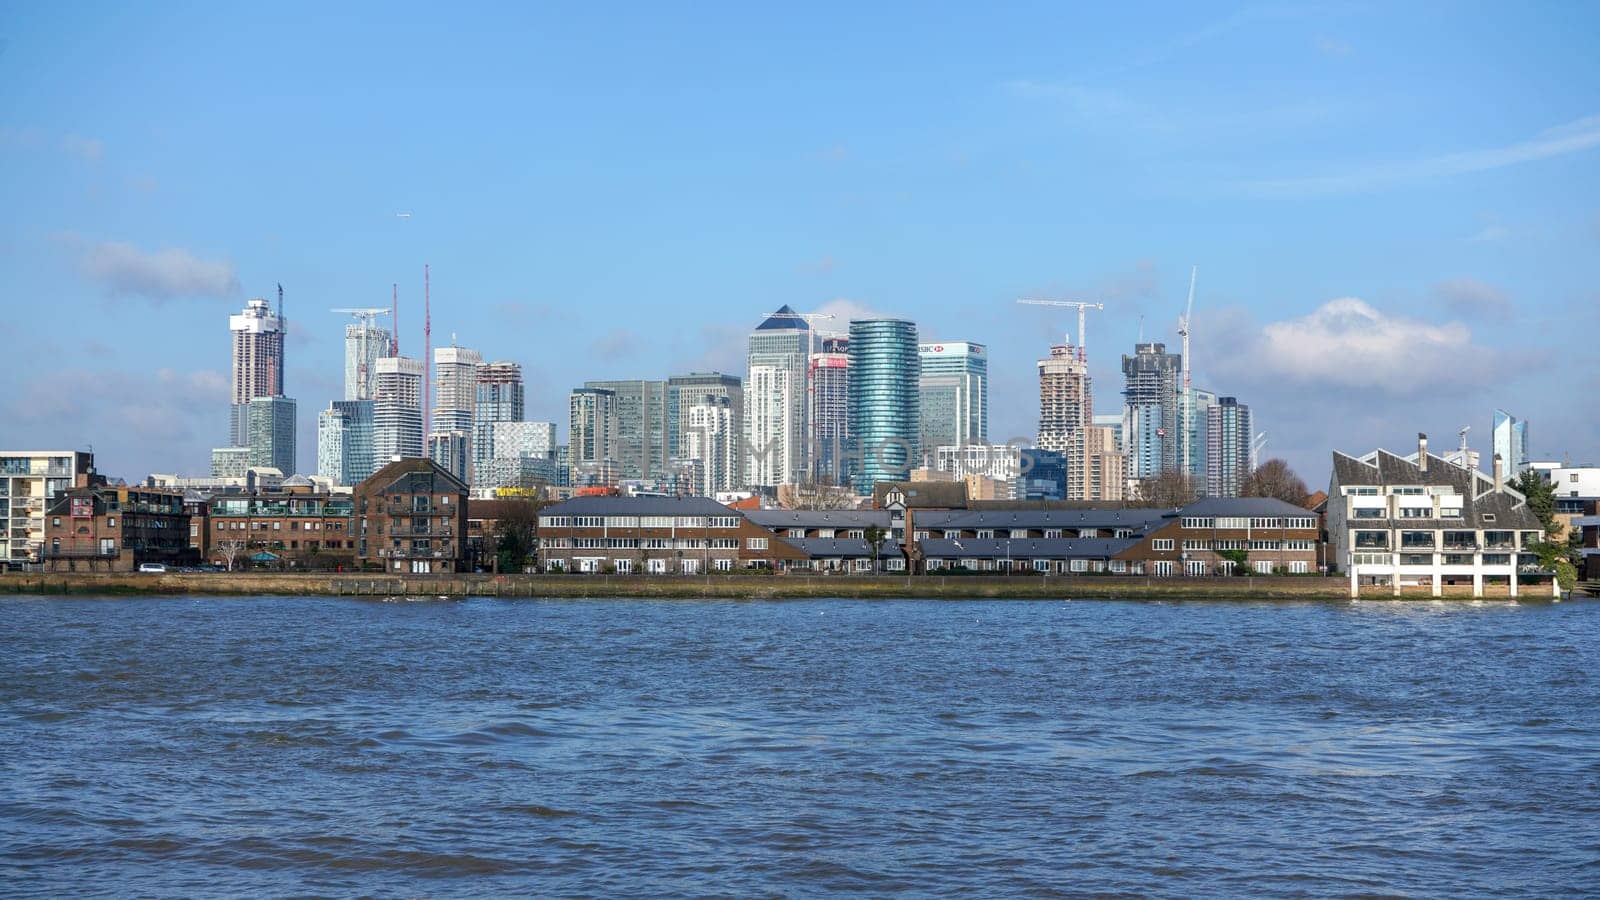 London, United Kingdom - February 03, 2019: View over river Thames on Canary Wharf, major financial district, with residential buildings in foreground. 